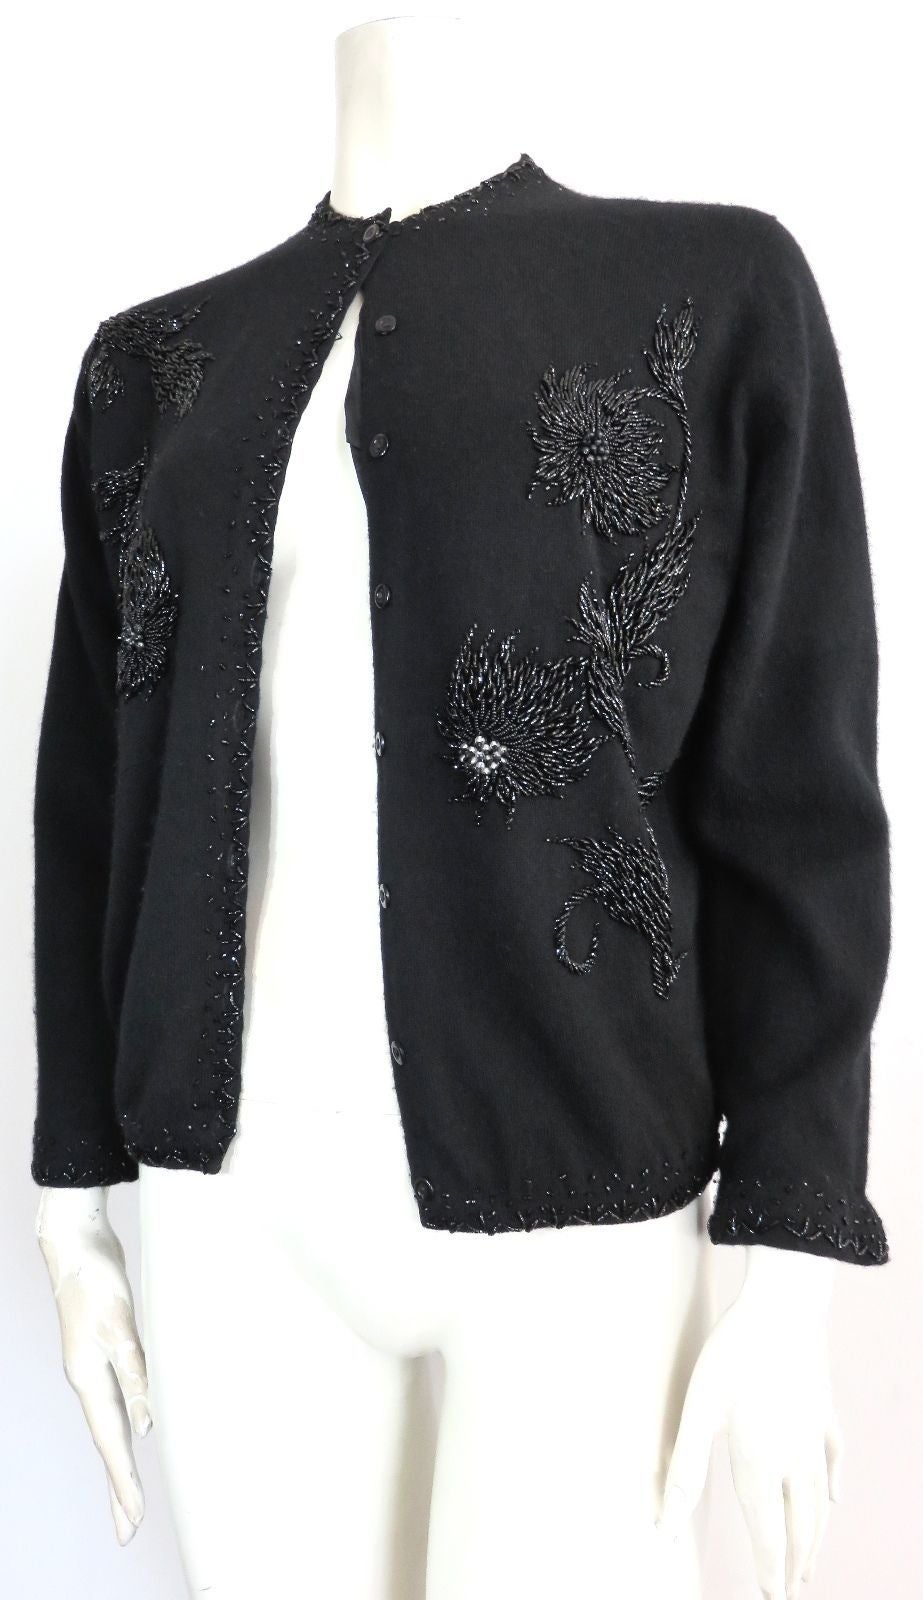 Lovely, 1960's PRINGLE OF SCOTLAND 100% cashmere sweater with gorgeous, floral beading artwork at front and back.

Ultra-plush and soft cashmere knit fabrication with detailed, jet-black hand-beading around edges of cardigan.

Button front